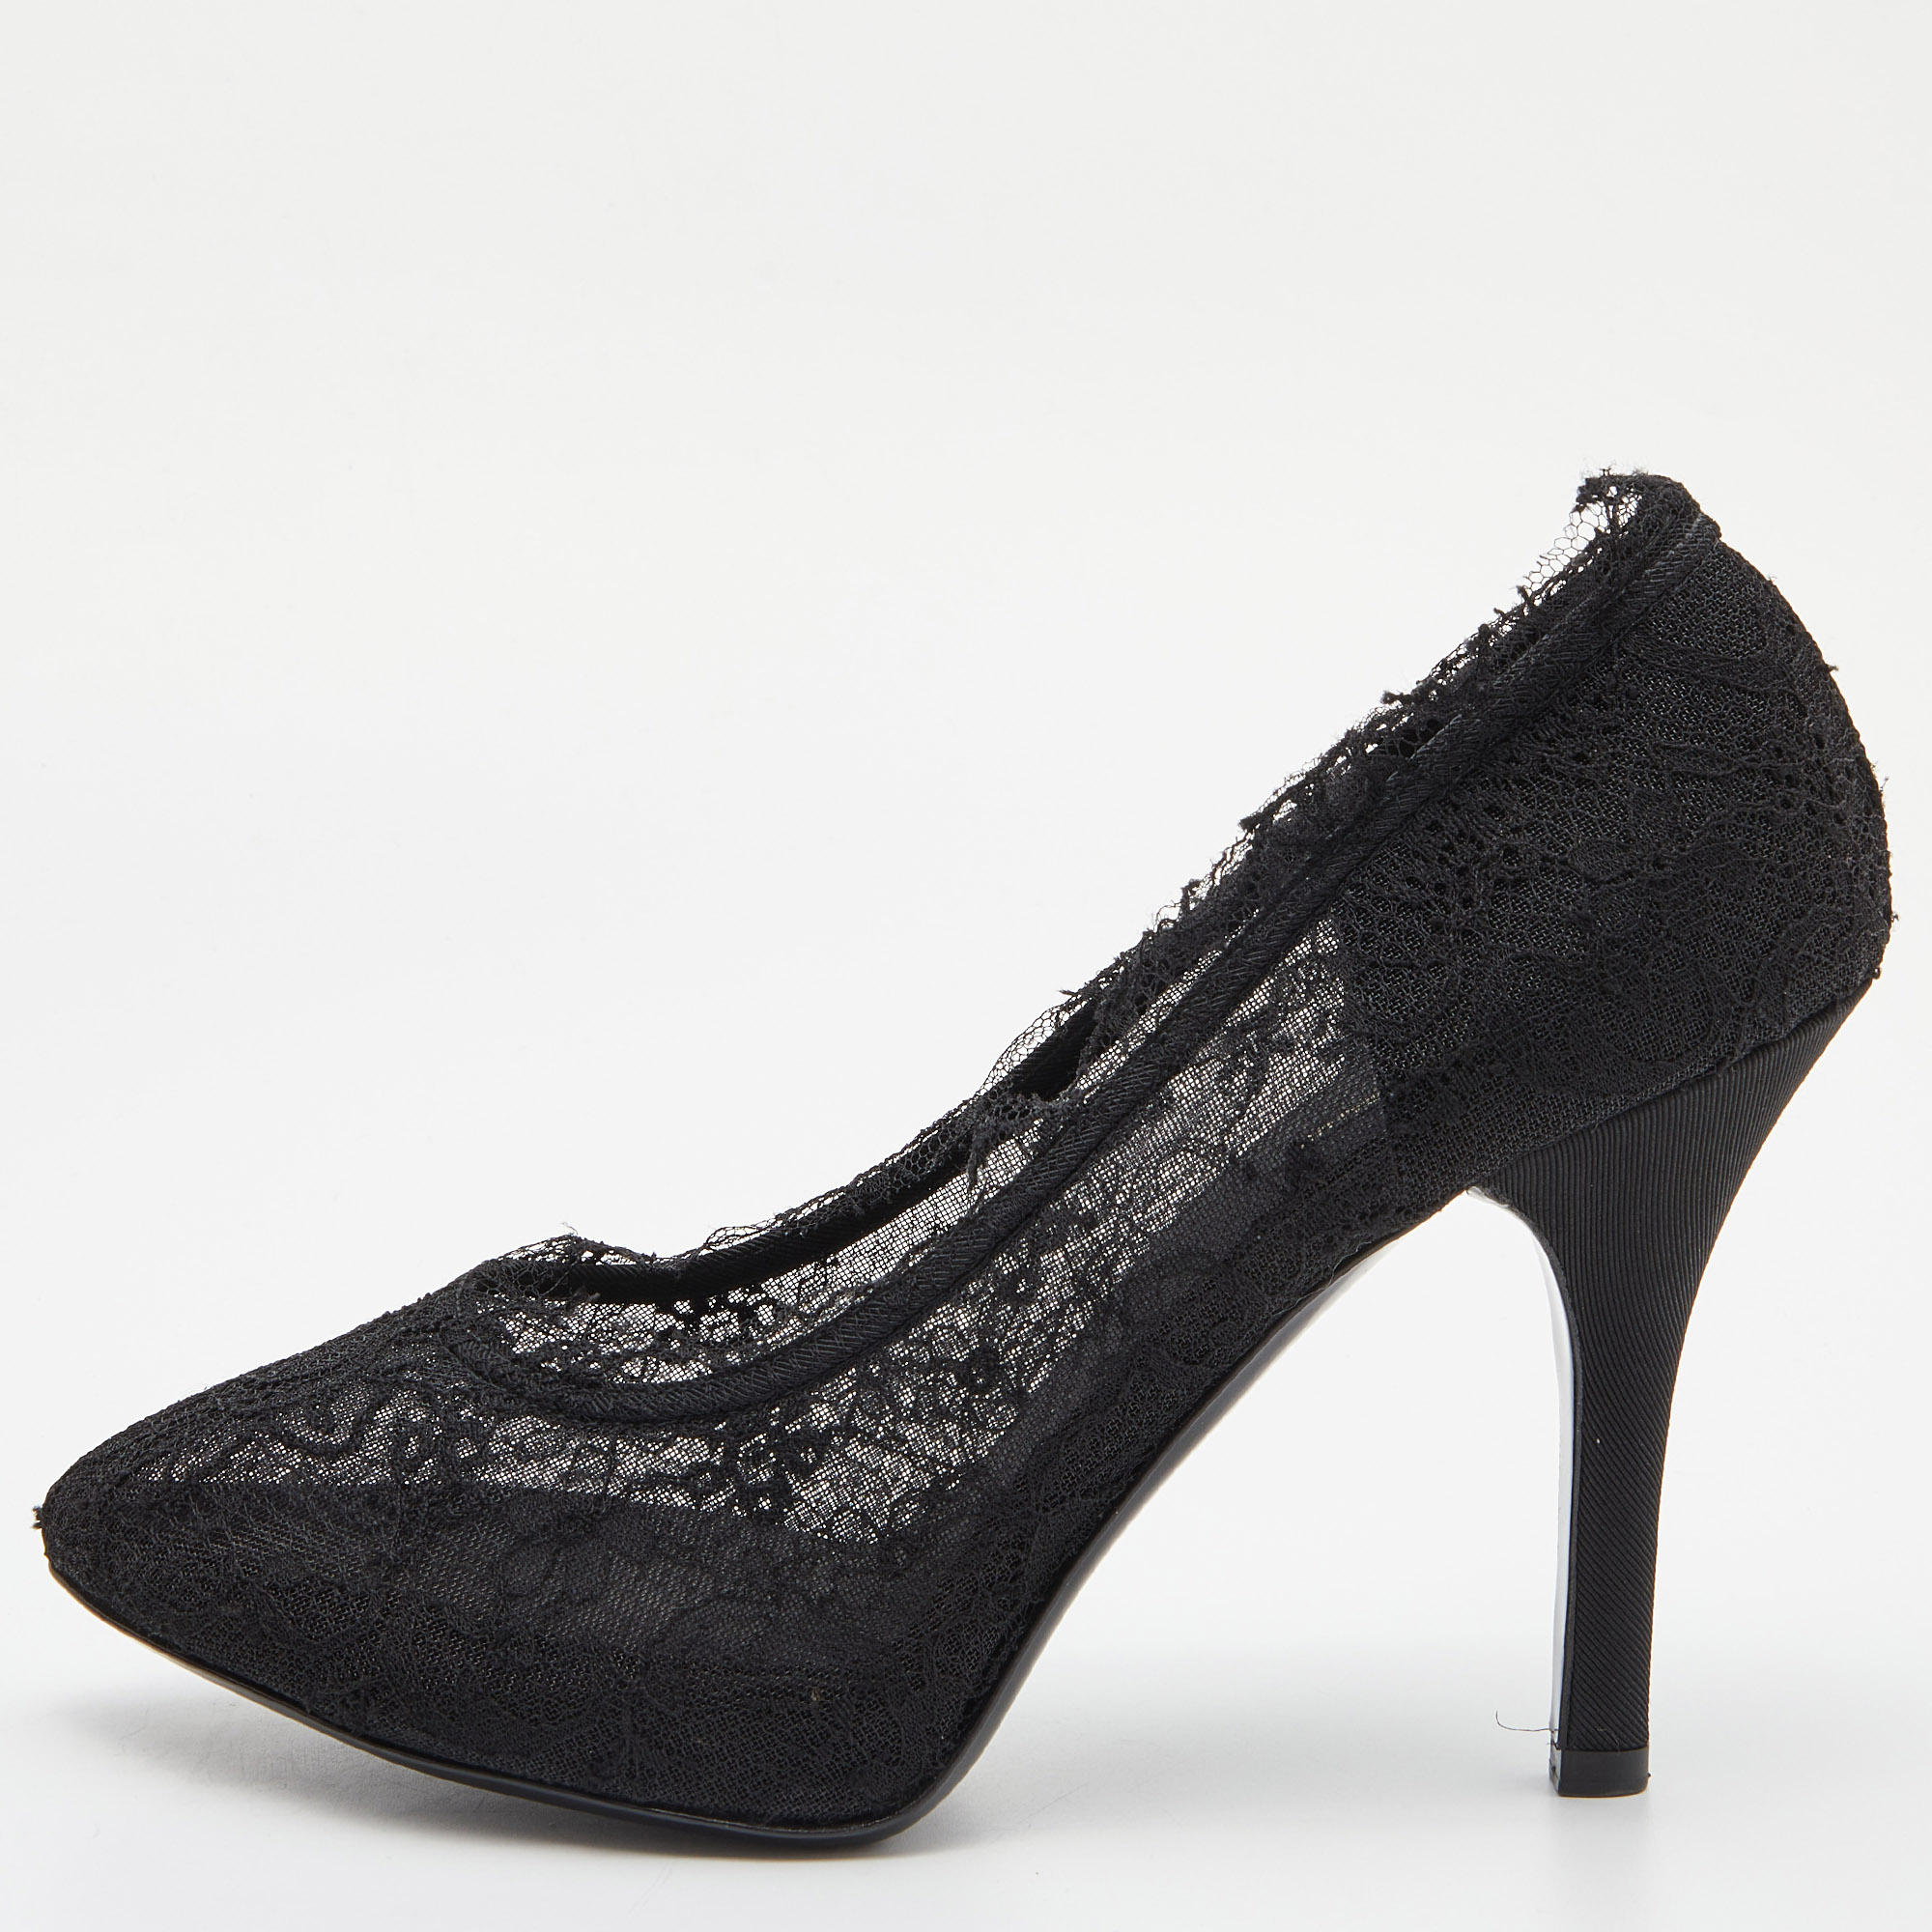 Dolce & Gabbana Black Lace And Fabric Pumps Size 39